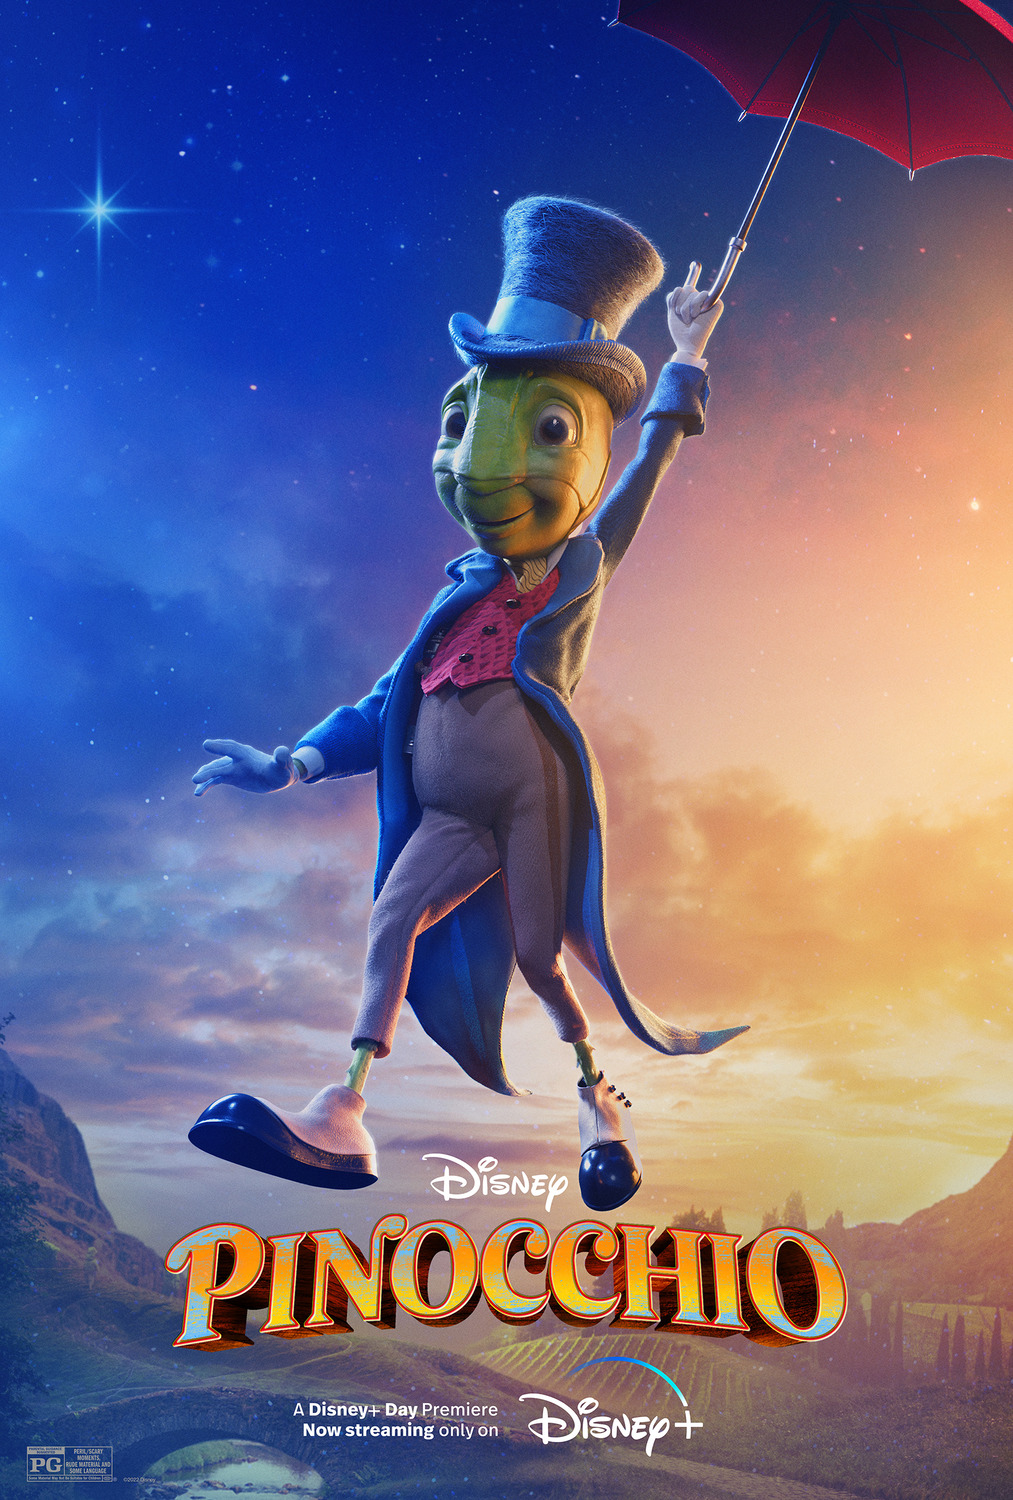 Extra Large Movie Poster Image for Pinocchio (#5 of 17)